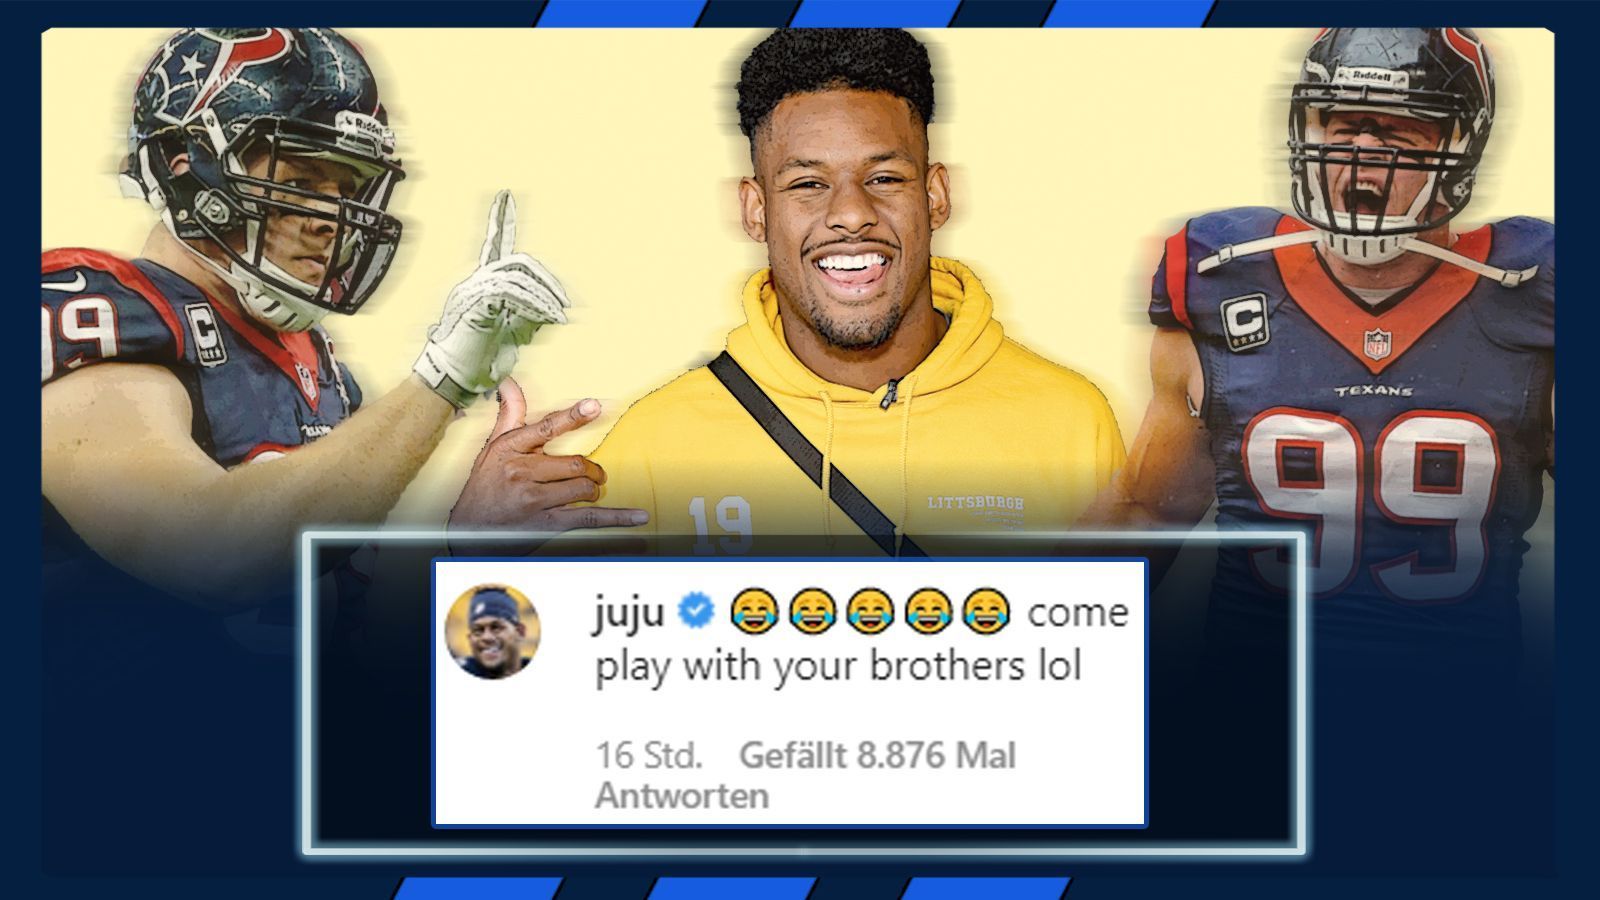 
                <strong>JuJu Smith-Schuster (Pittsburgh Steelers)</strong><br>
                
              